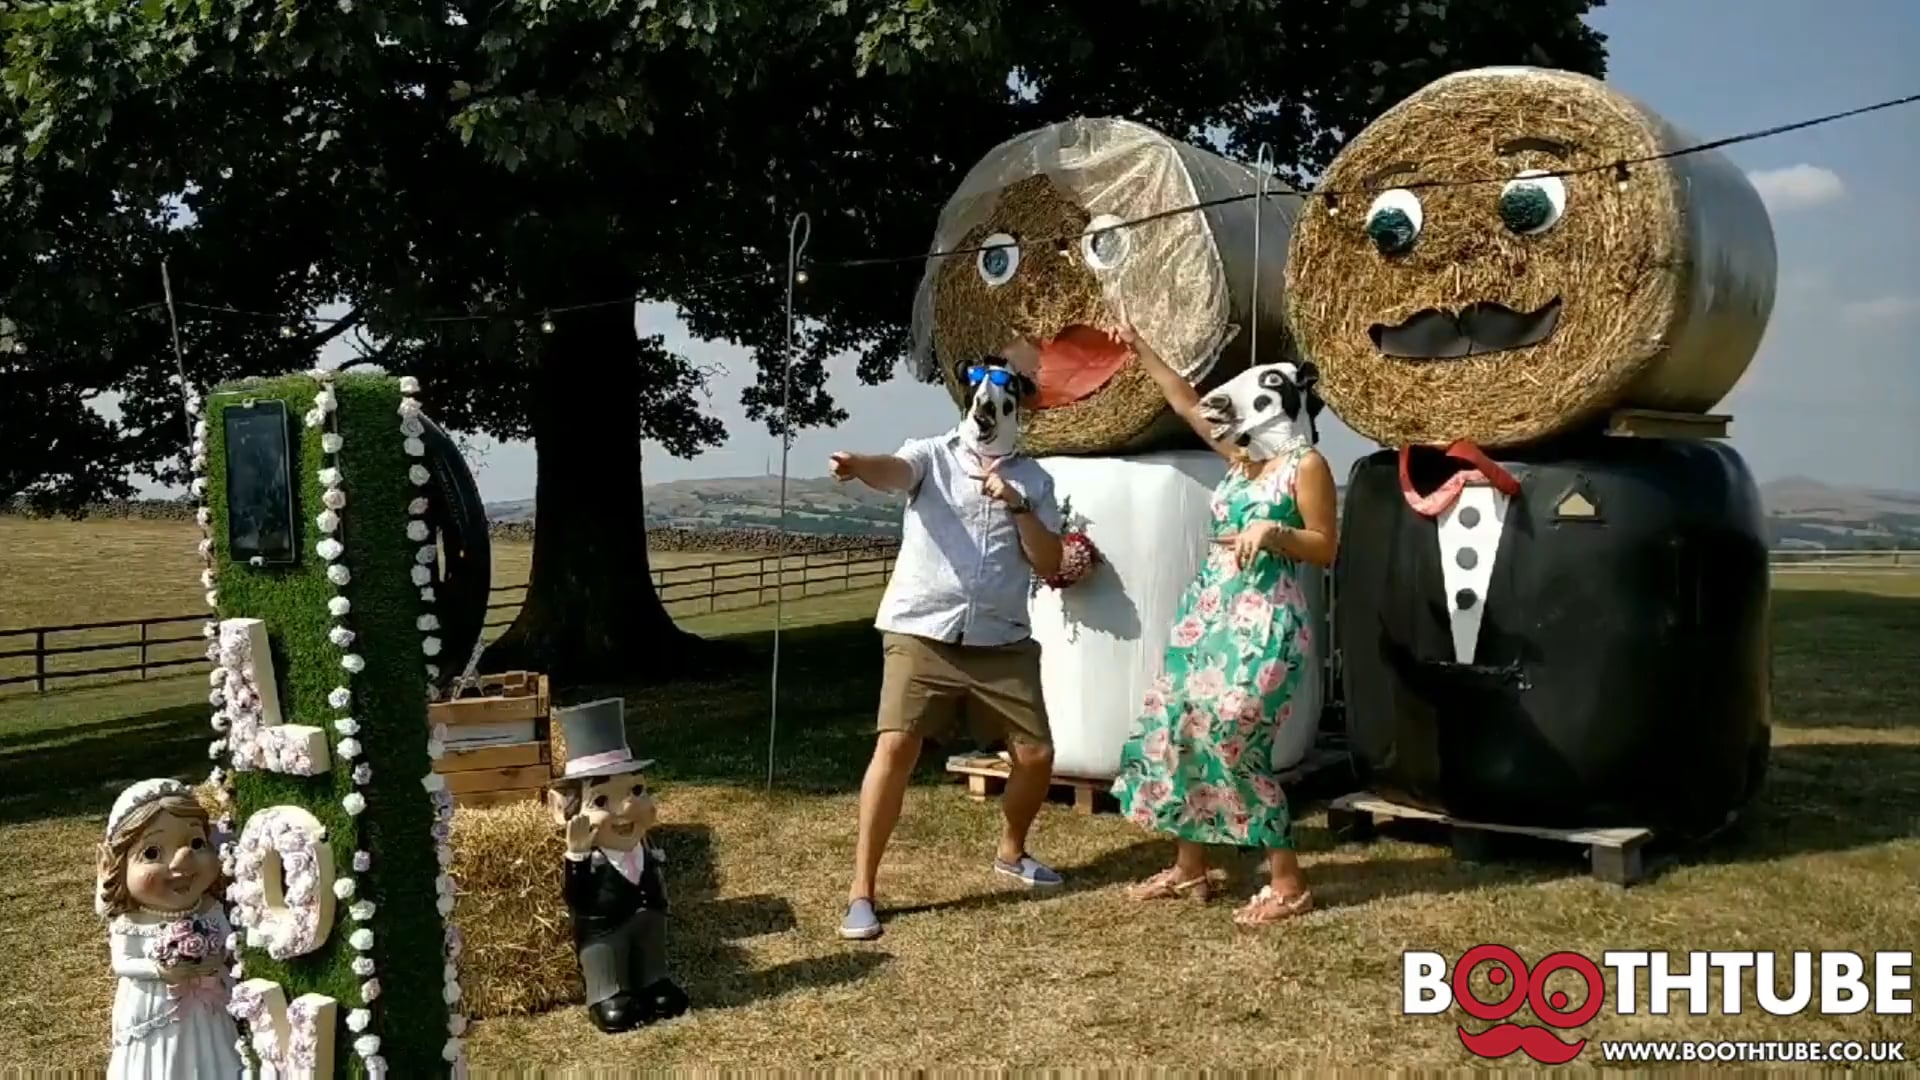 Boothtube - Our new photo booths with social sharing and GIF capture.